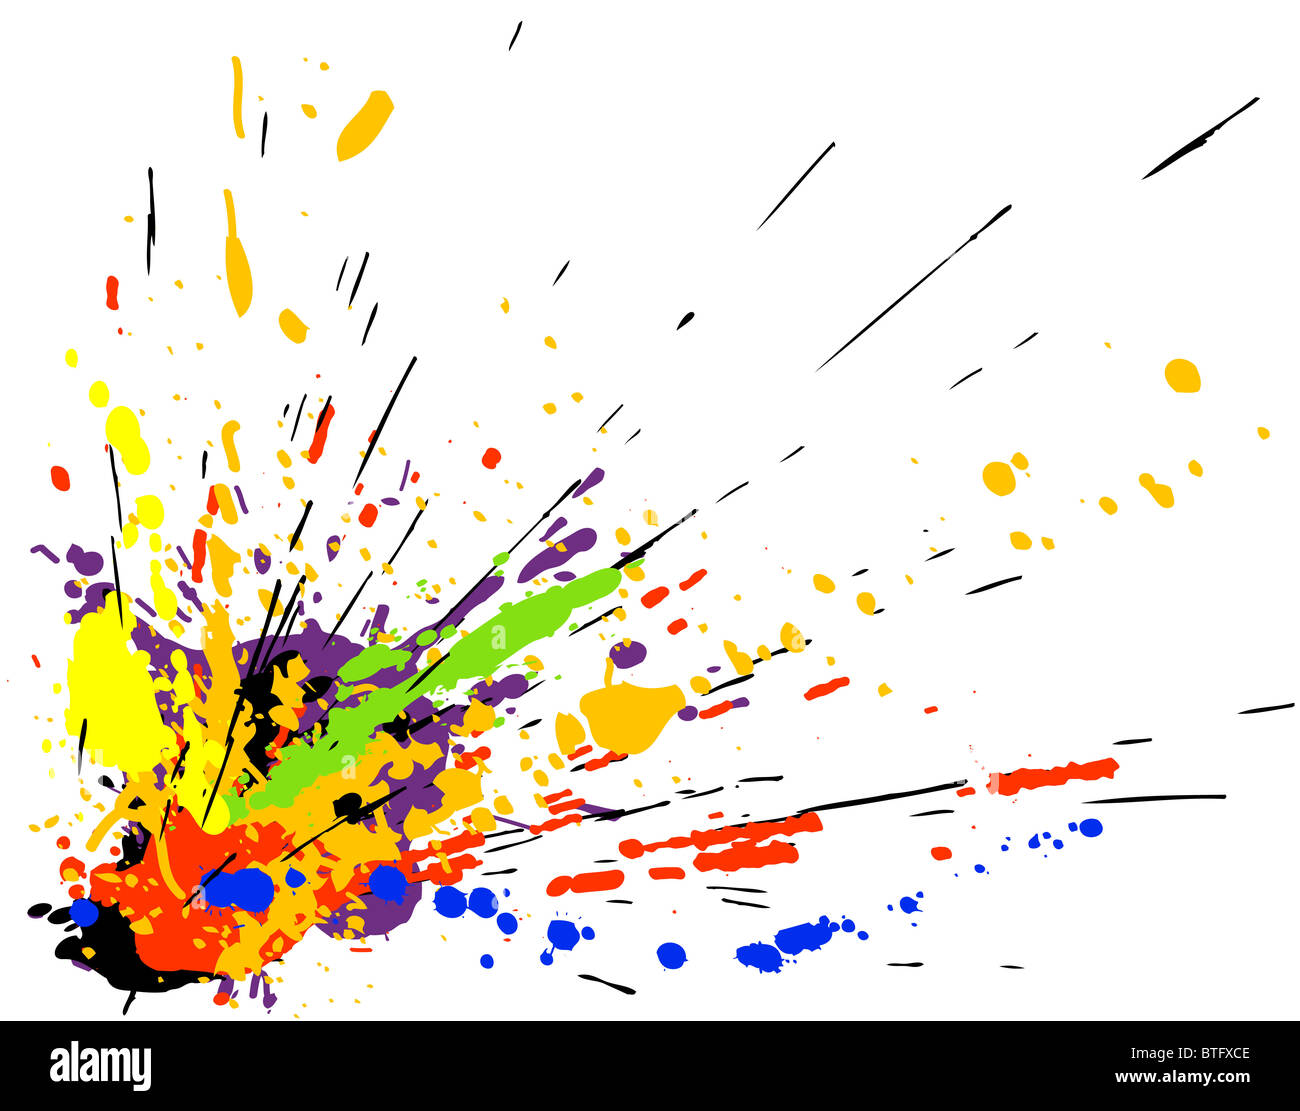 Colorful illustrated design of paint spill grunge Stock Photo